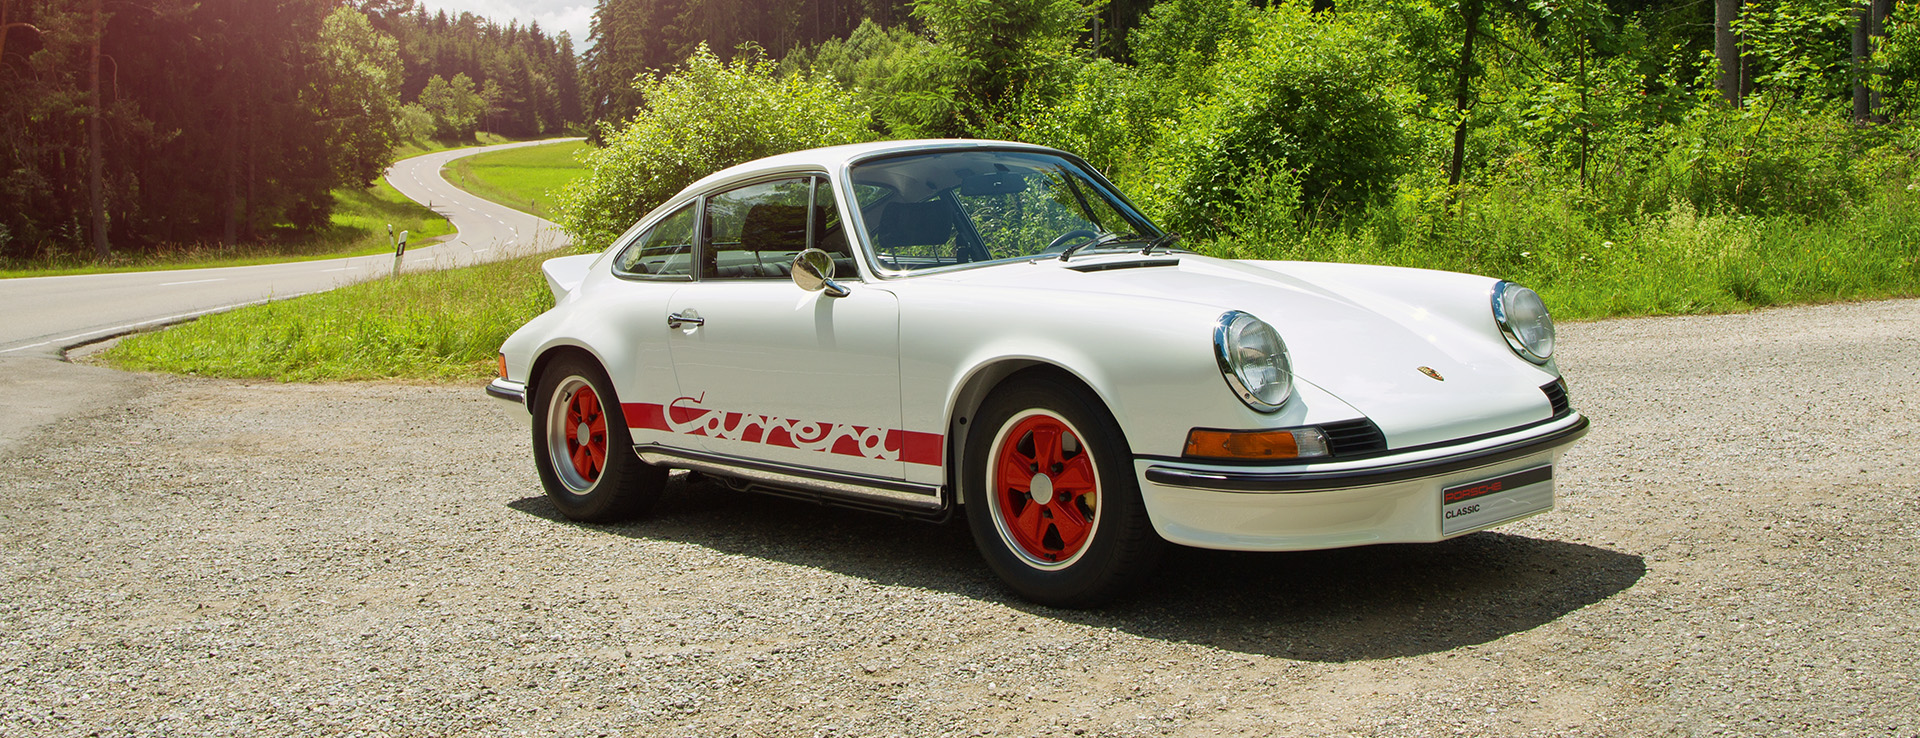 White with red Porsche 911 Carrera RS 2.7 with ducktail